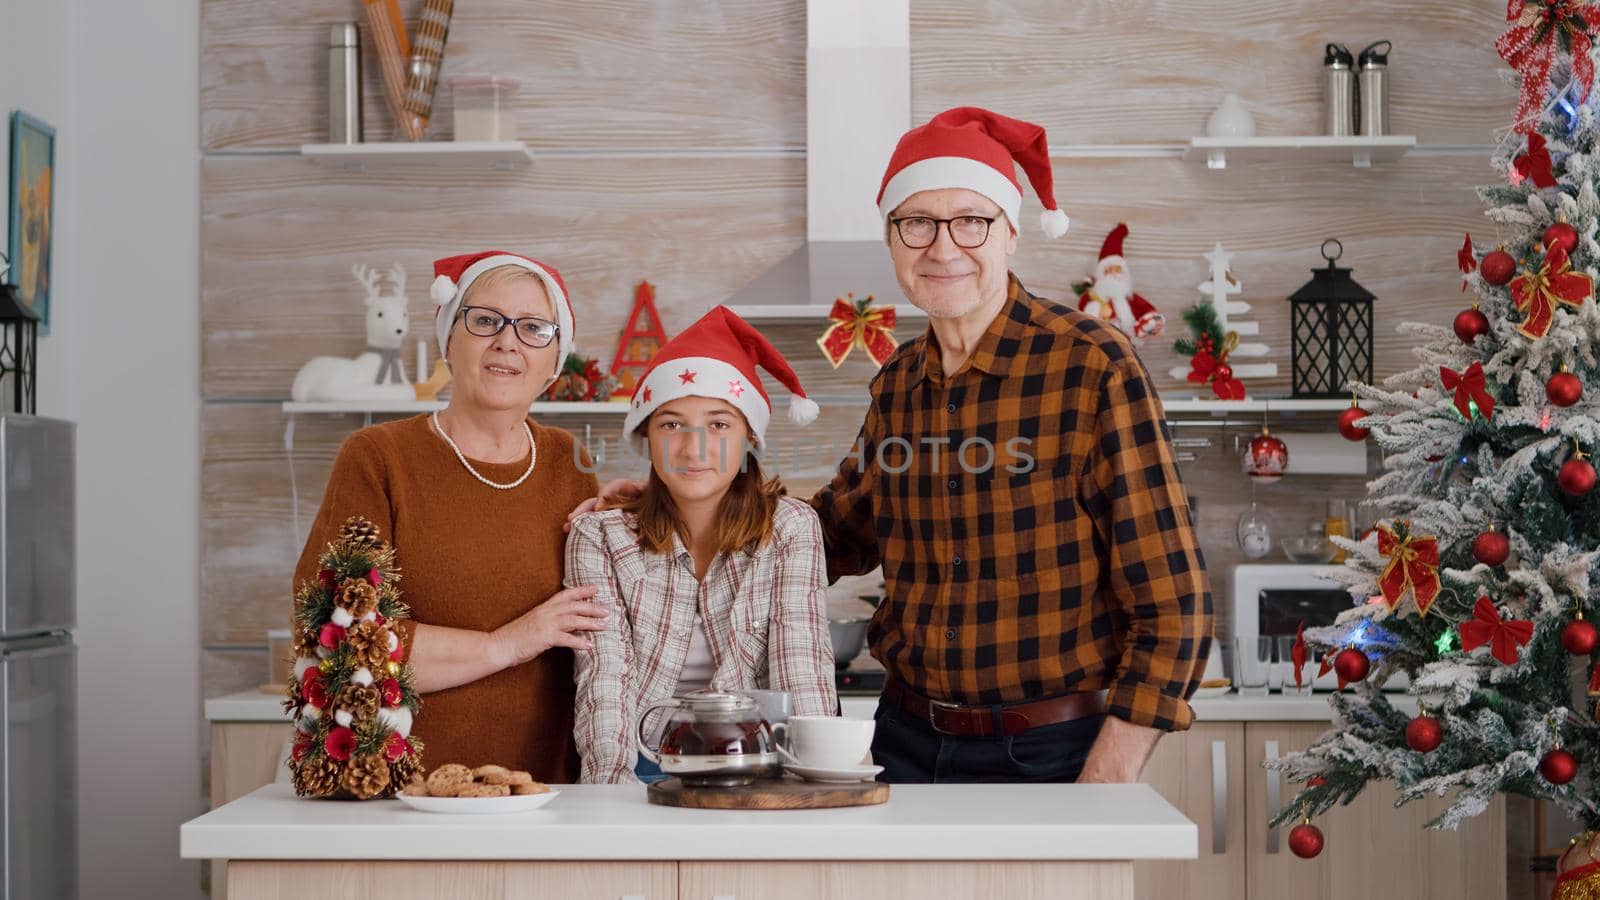 Portrait of happy family wearing santa hat looking into camera standing at table in xmas decorated kitchen. Grandparents enjoying winter season spending christmas holiday with grandchild